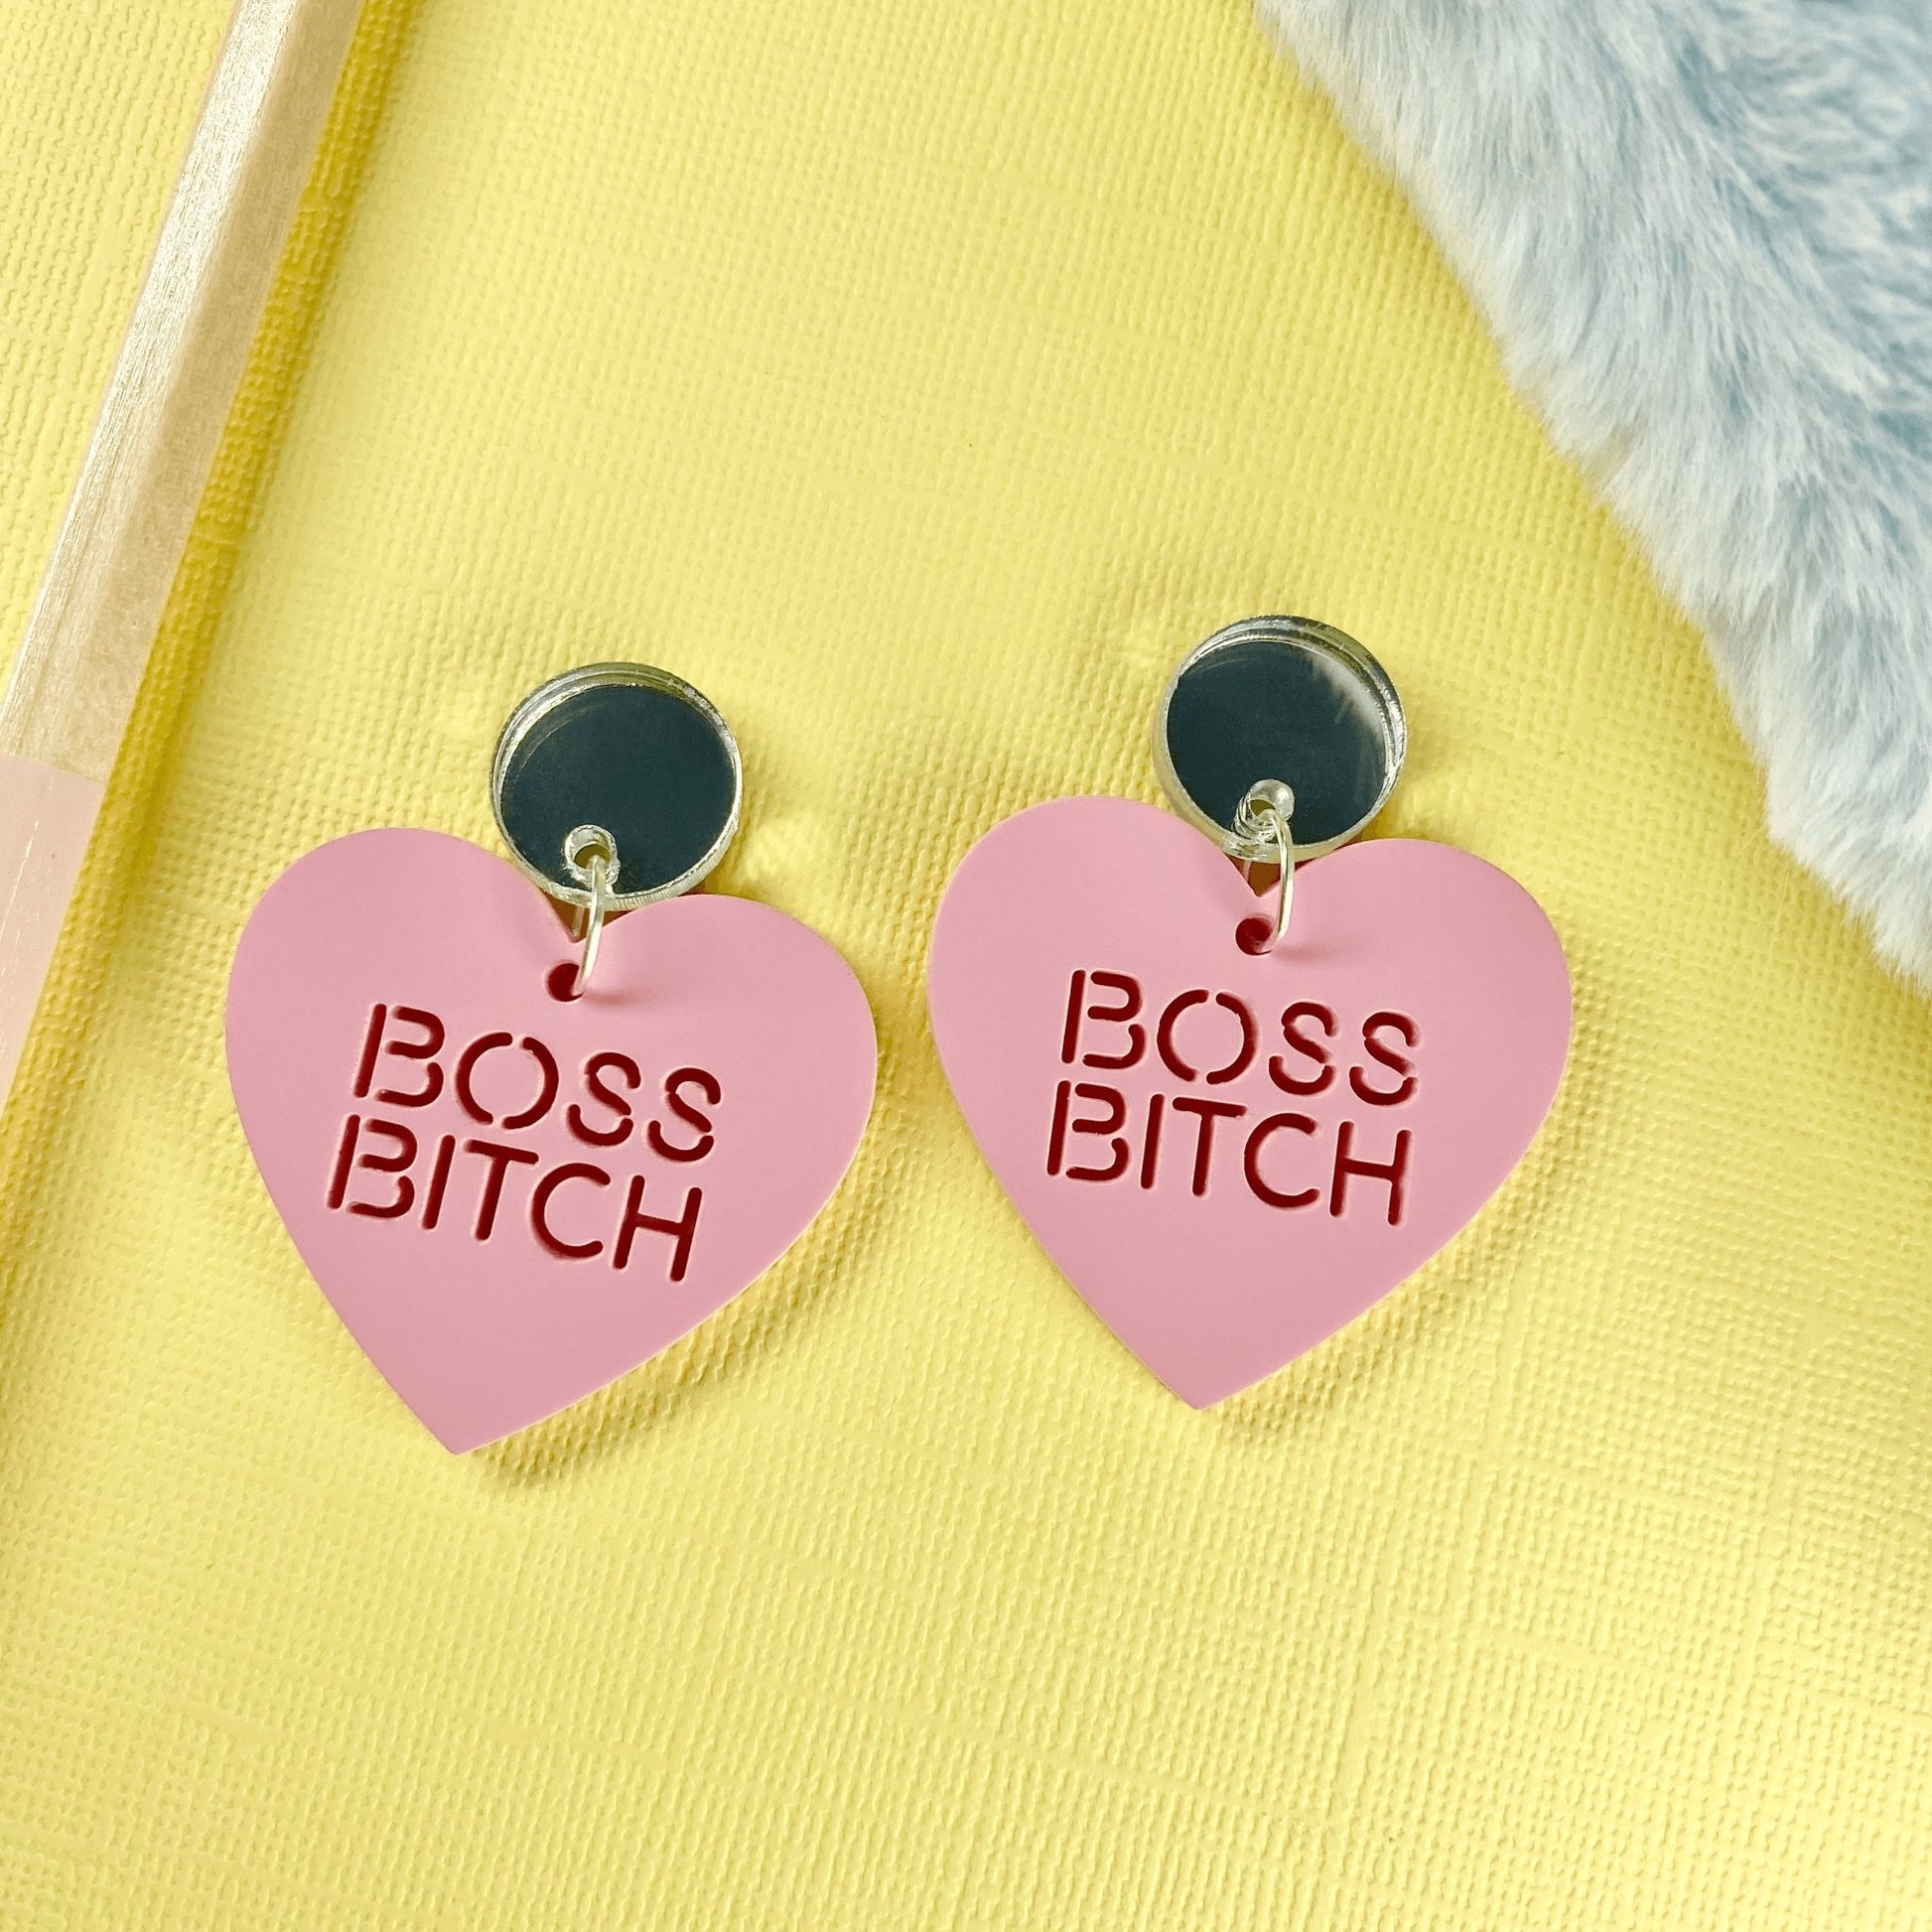 Boss B-tch Candy Heart Earrings (6 colours available) - Lost Minds Clothing